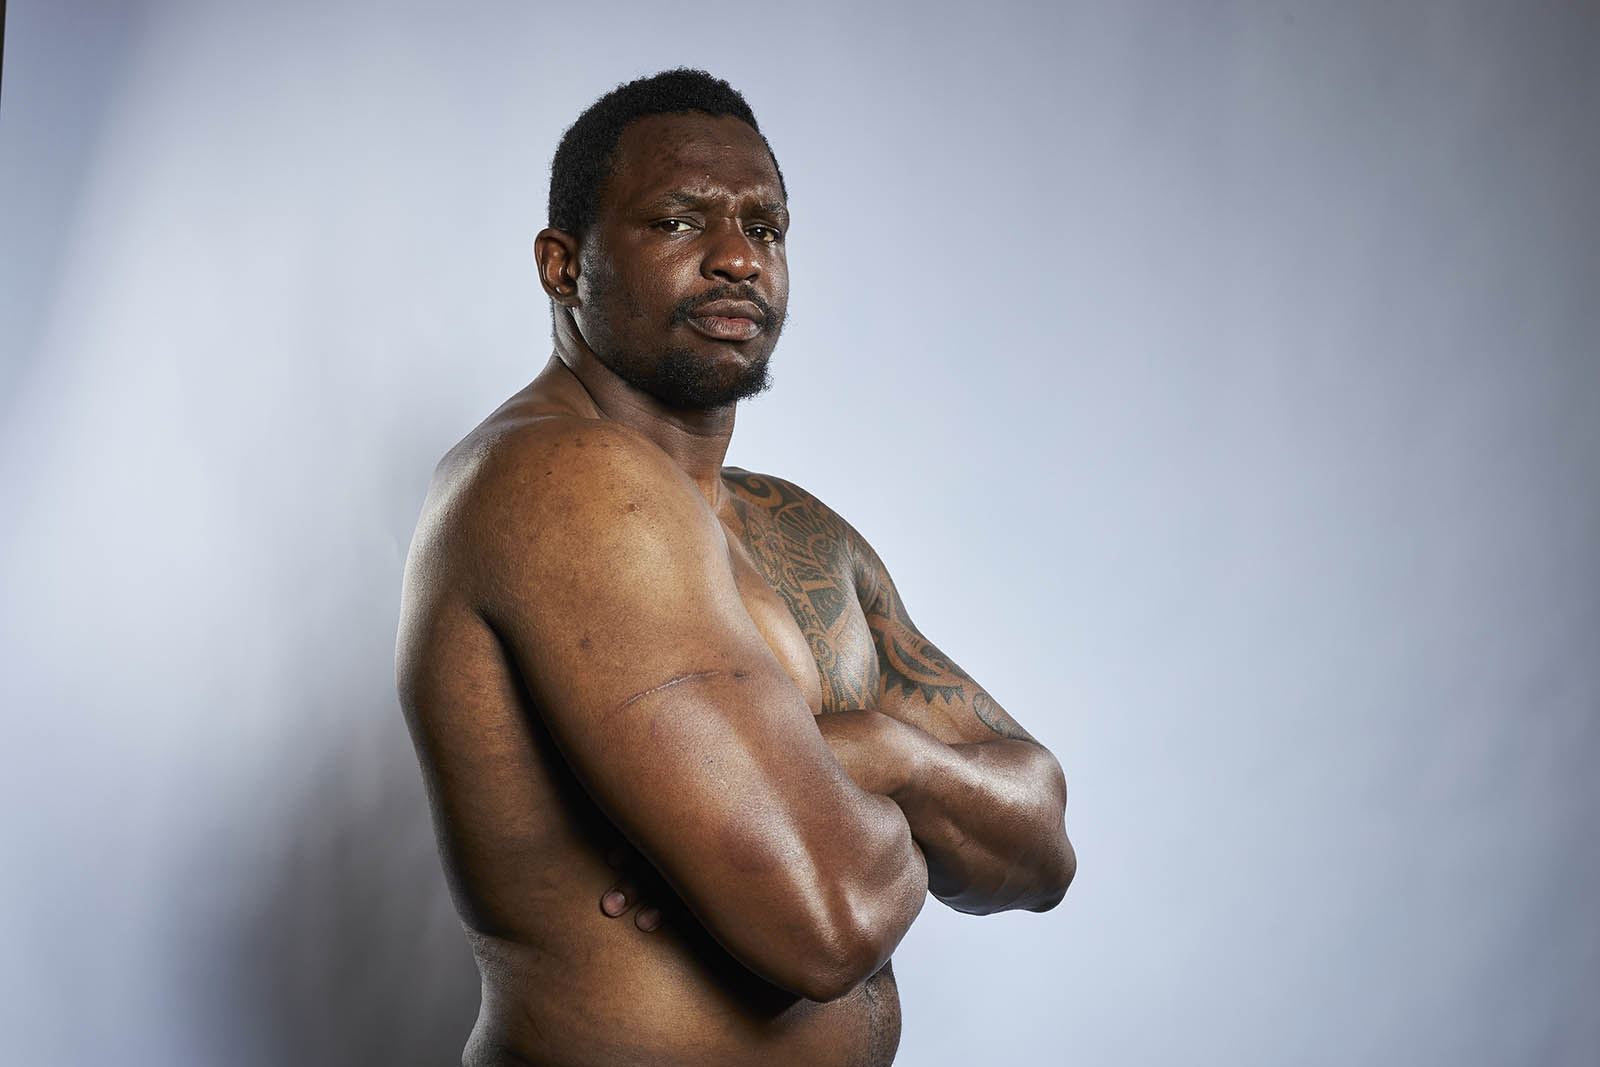 Dillian Whyte. Co bude?